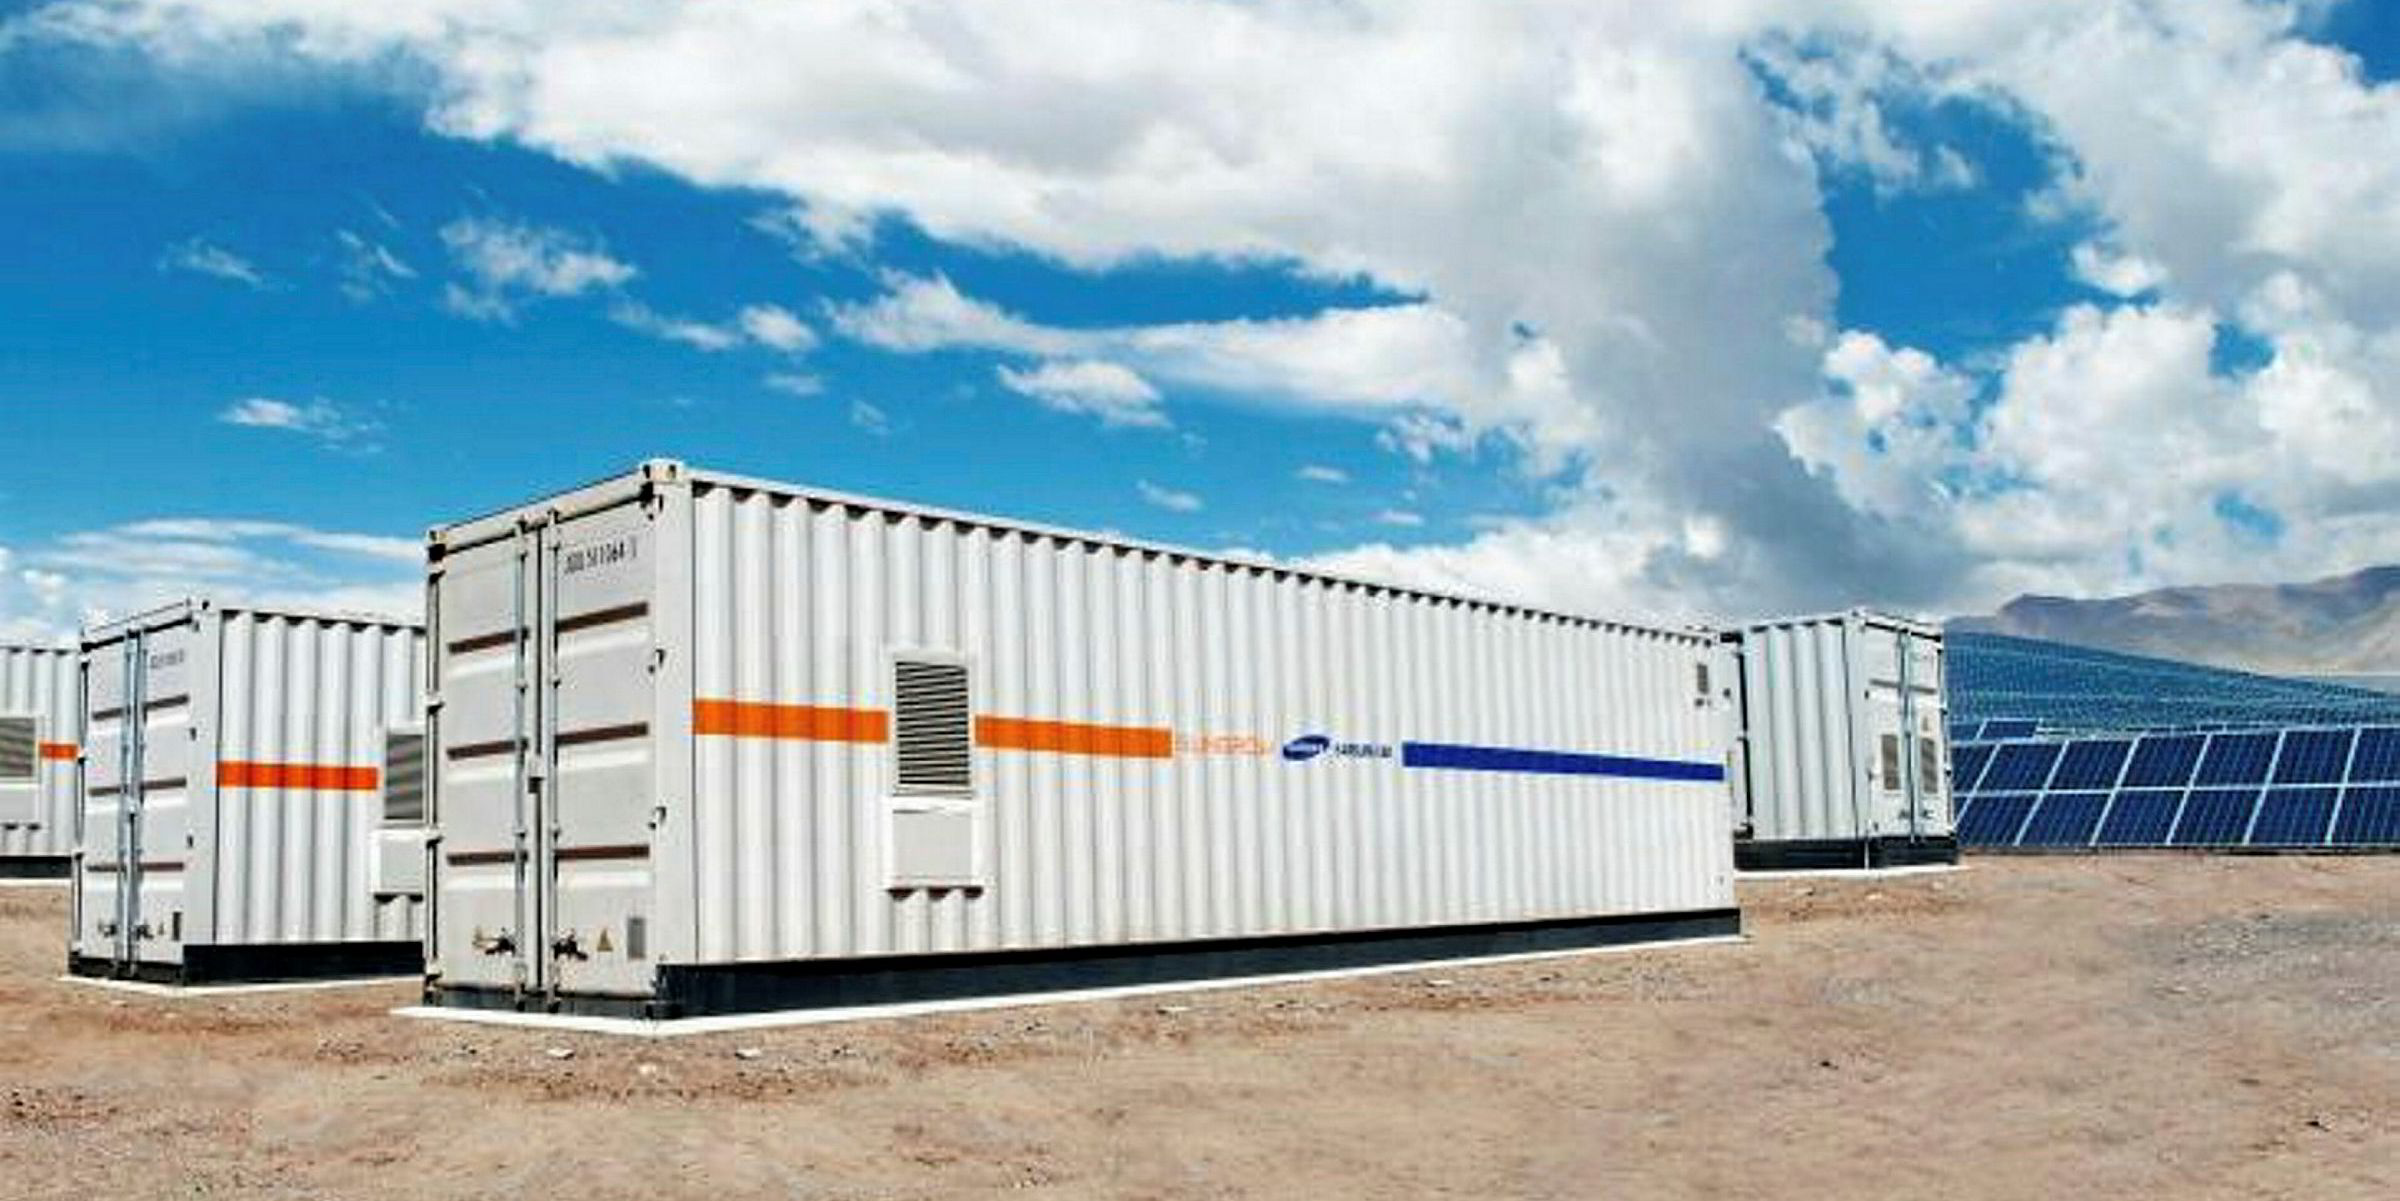 Global energy storage market to defy Covid and top 15GW in 2025: IHS